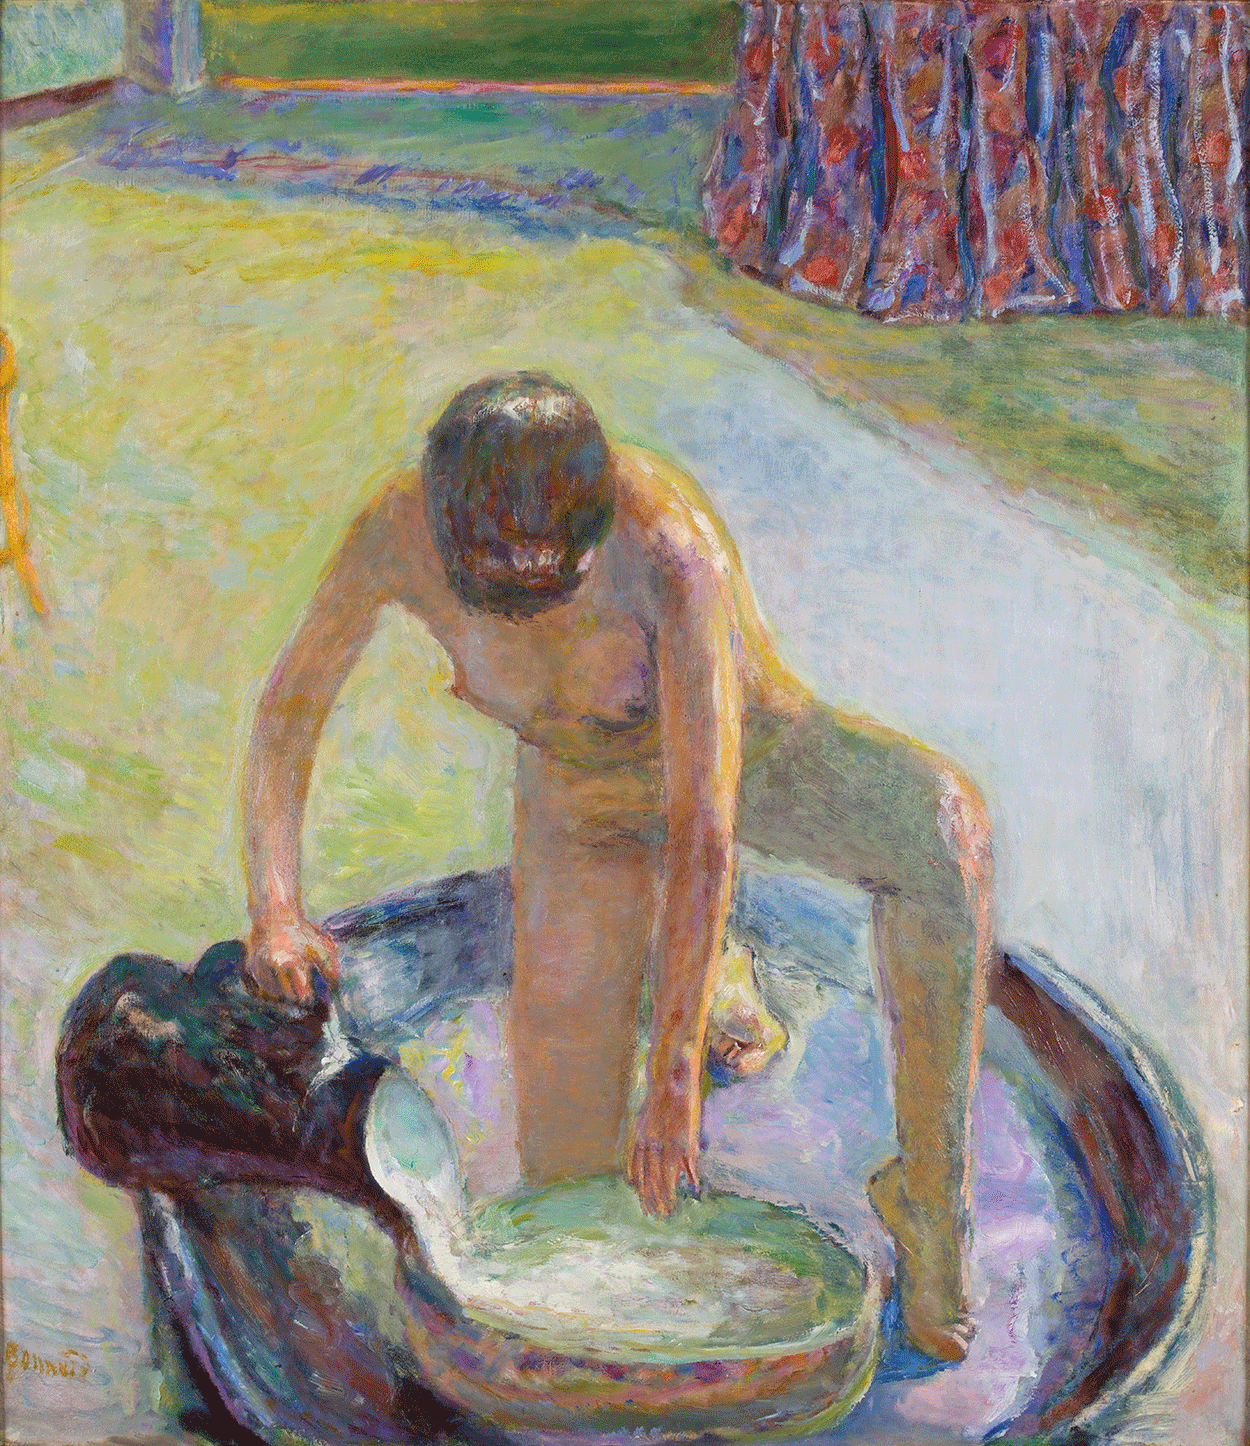 Crouching Nude in the Tub by Pierre Bonnard - 1918 - 85 × 74,2 cm Musée Bonnard